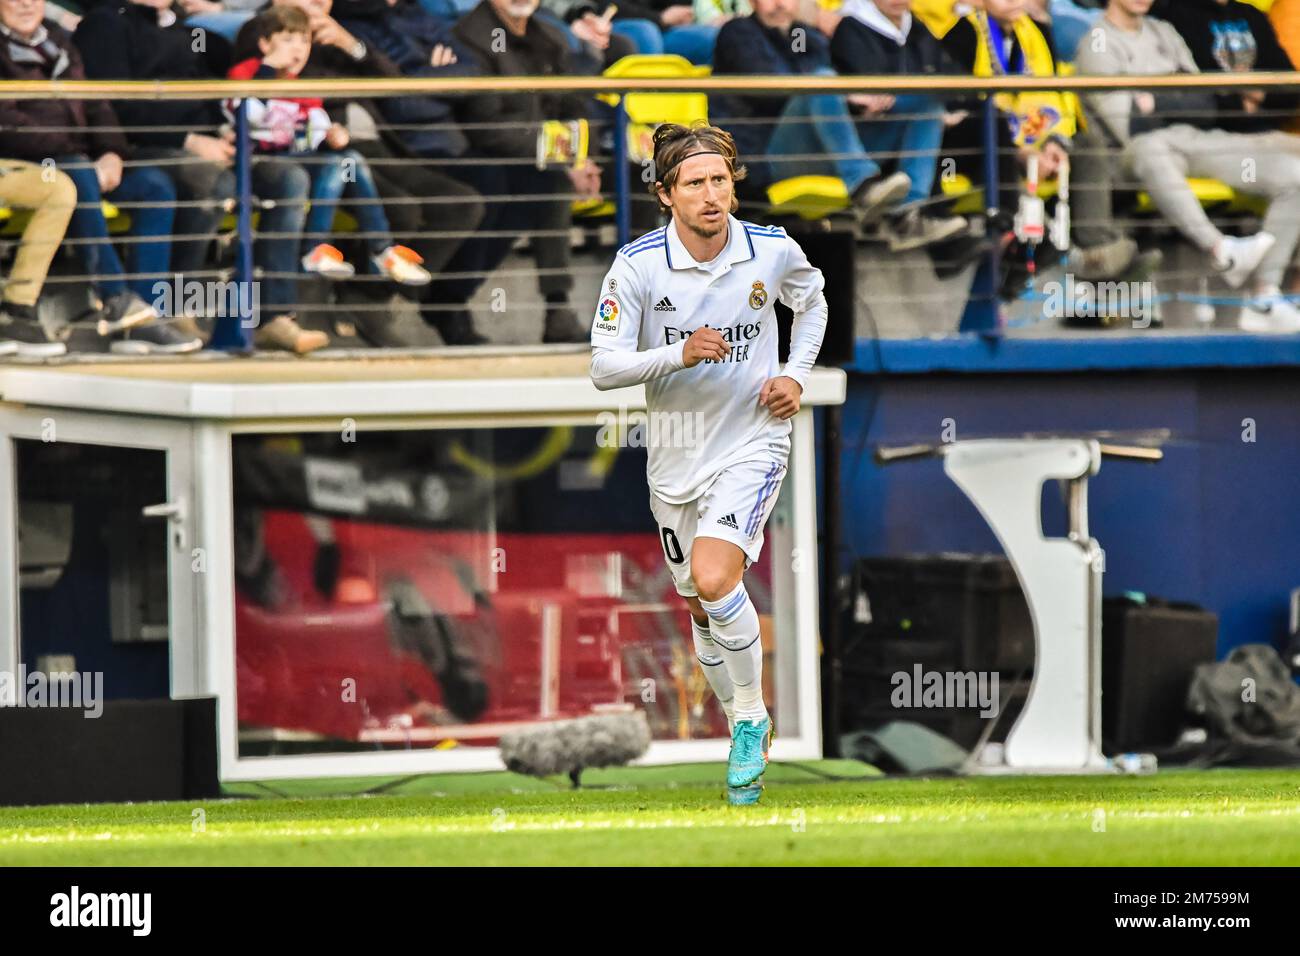 VILLARREAL, SPAIN - JANUARY 7:Luka Modric of Real Madrid CF run for the ball during the match between Villarreal CF and Real Madrid CF of La Liga Santander on January 7, 2023 at Estadi de la Ceramica in Villarreal, Spain. (Photo by Samuel Carreño/ PX Images) Credit: Px Images/Alamy Live News Stock Photo